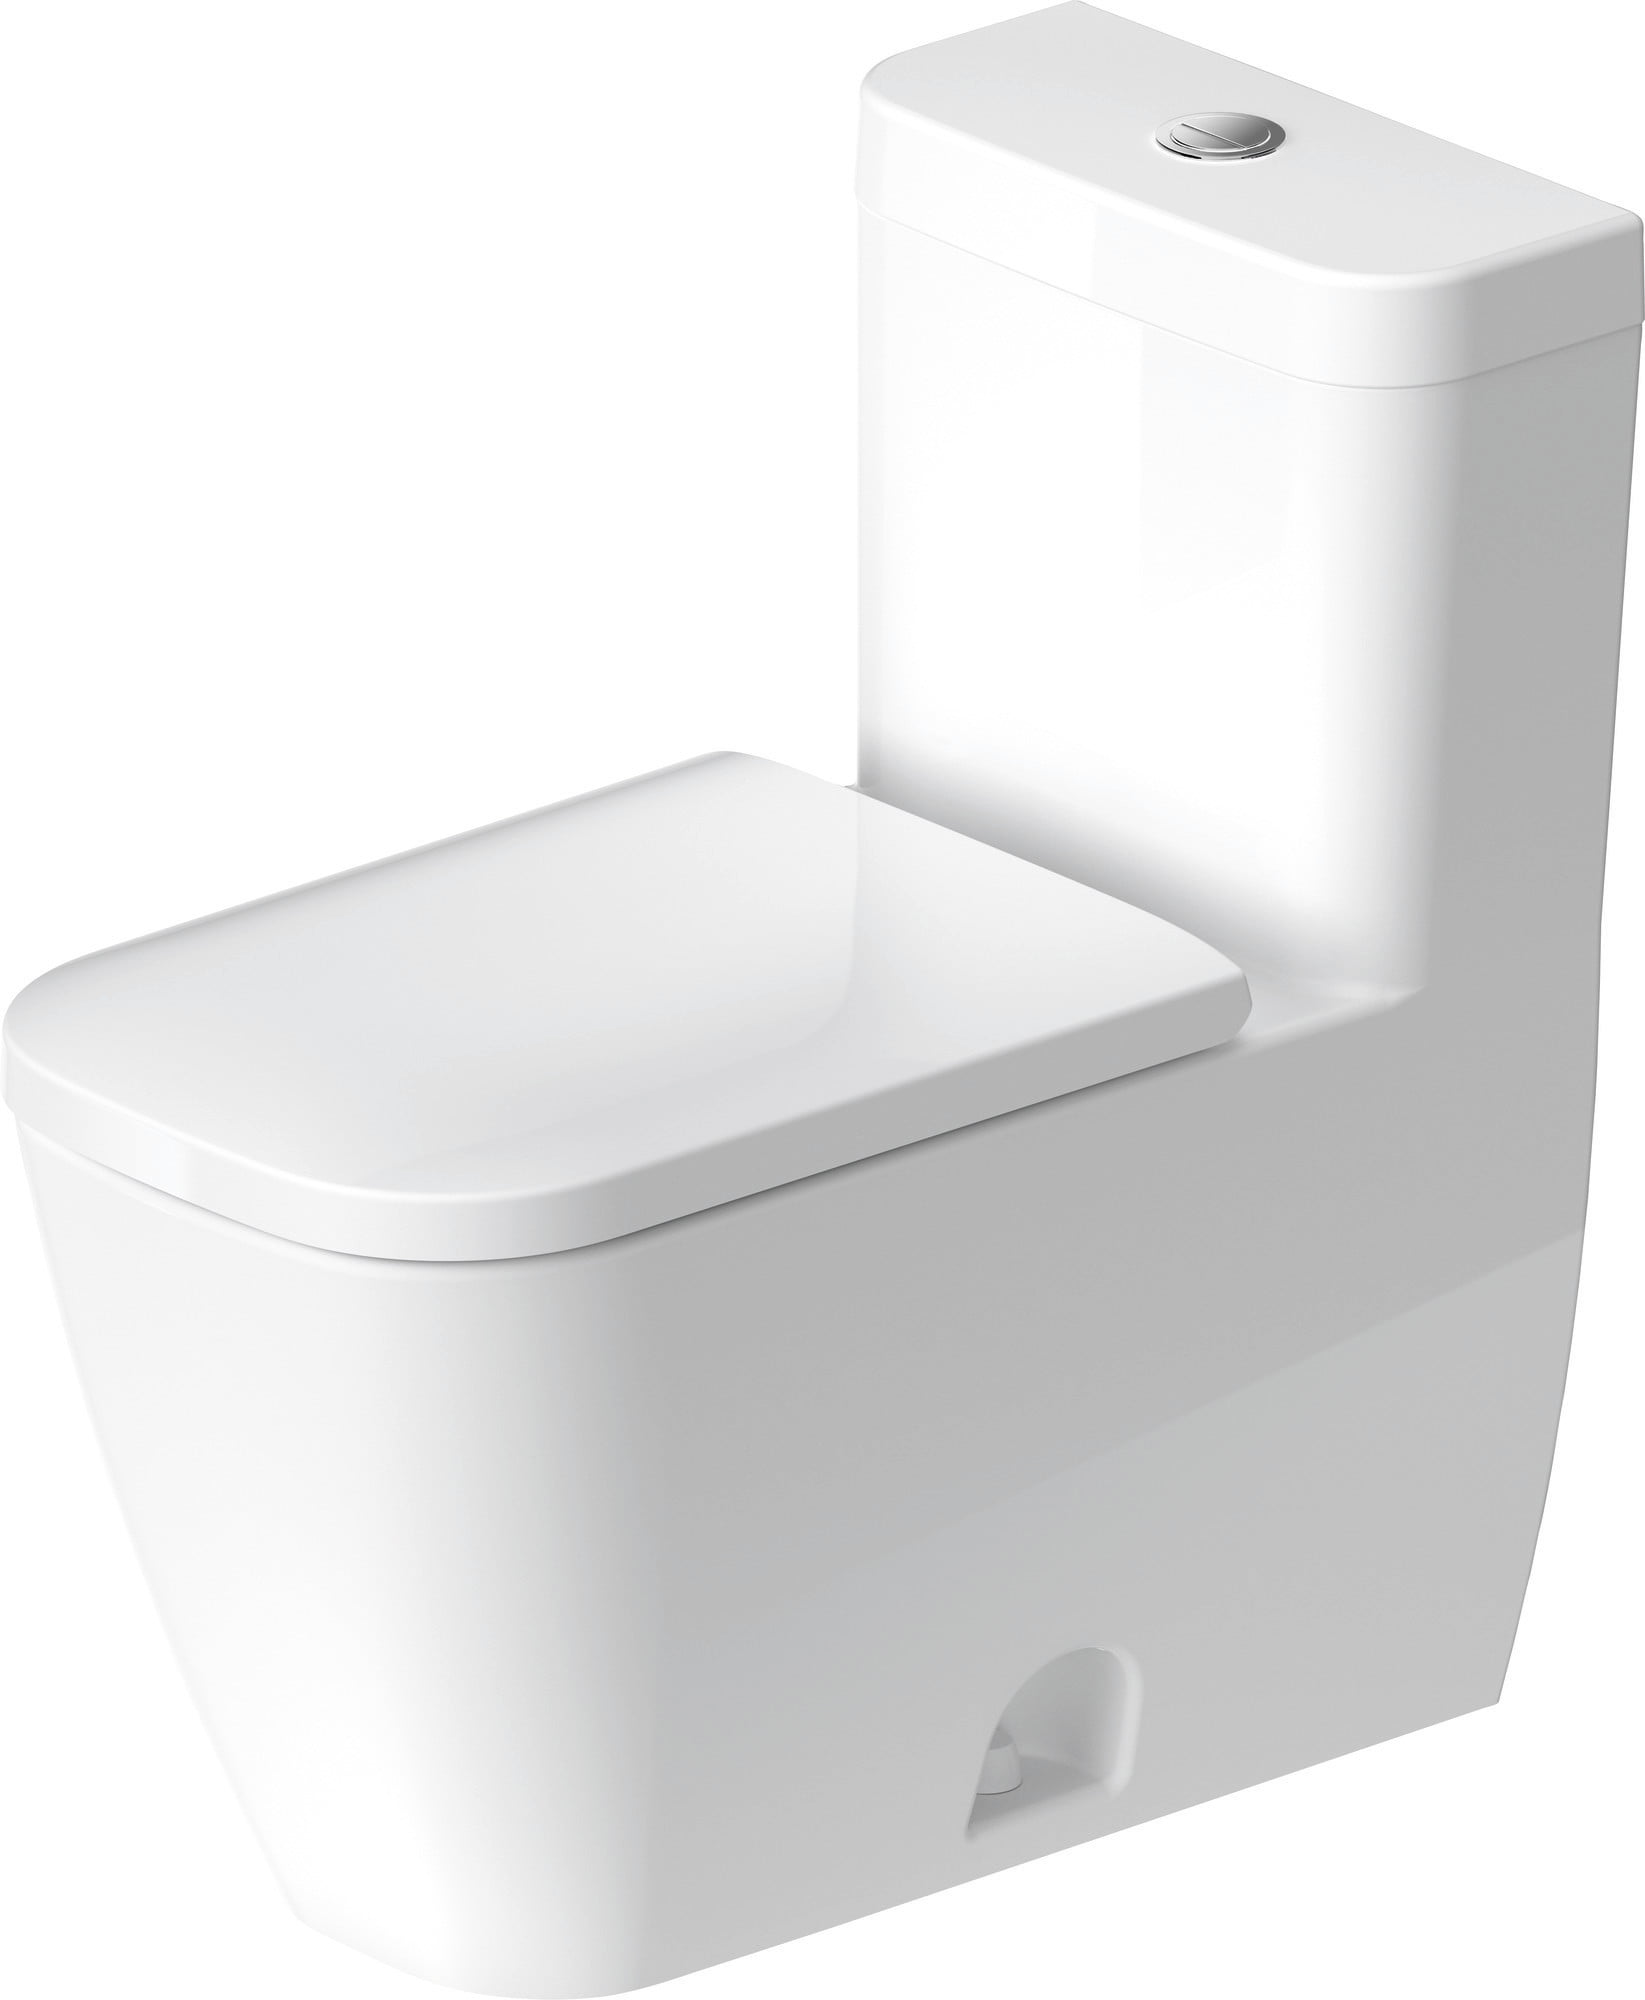 Fiore 33292 One Piece Elongated Toilet w/ Soft Close Seat ADA Comfort Height 